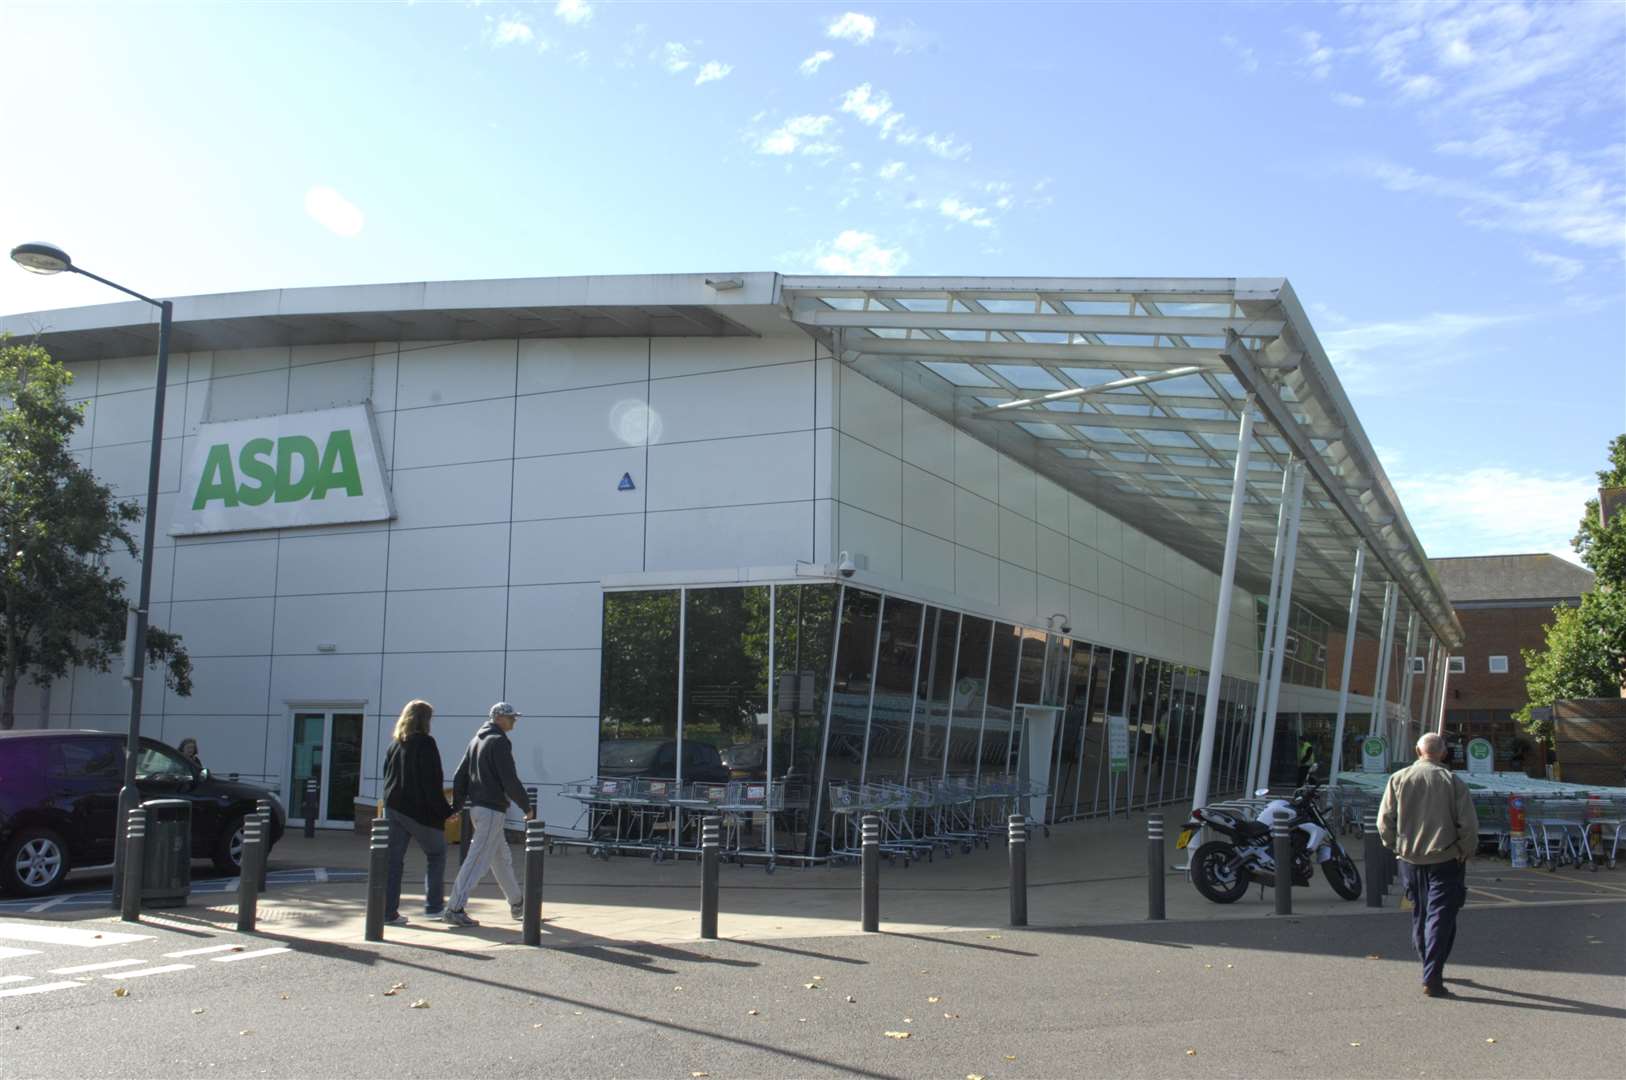 There is an Asda store in Liberty Square